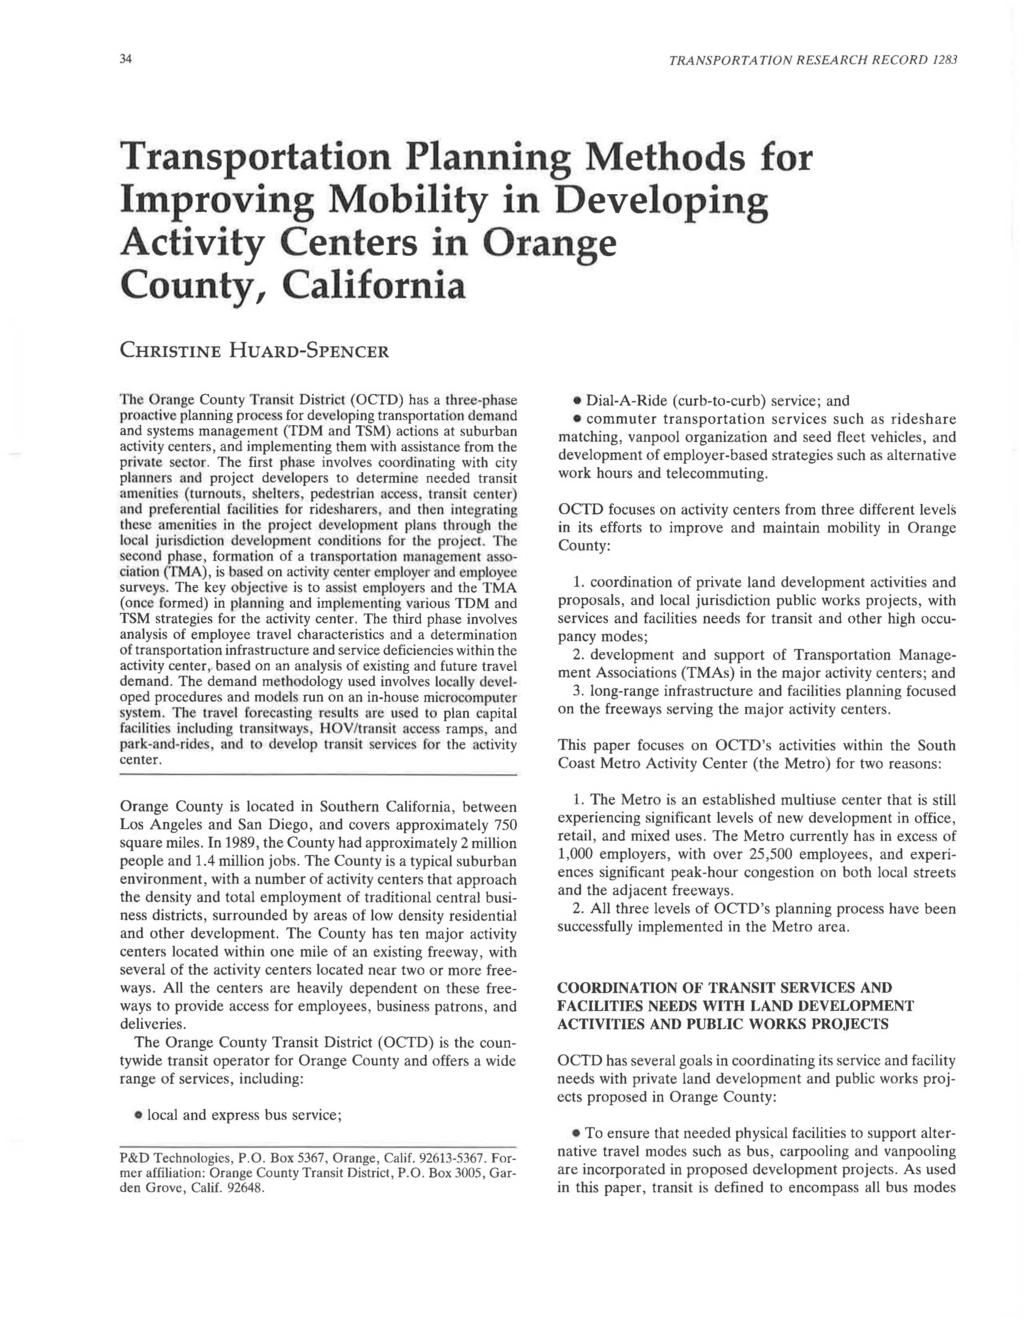 34 TRANSPORTATION RESEARCH RECORD 1283 Transportation Planning Methods for Improving Mobility in Developing Activity Centers in Orange County, California CHRISTINE HUARD-SPENCER Tbe Orange County